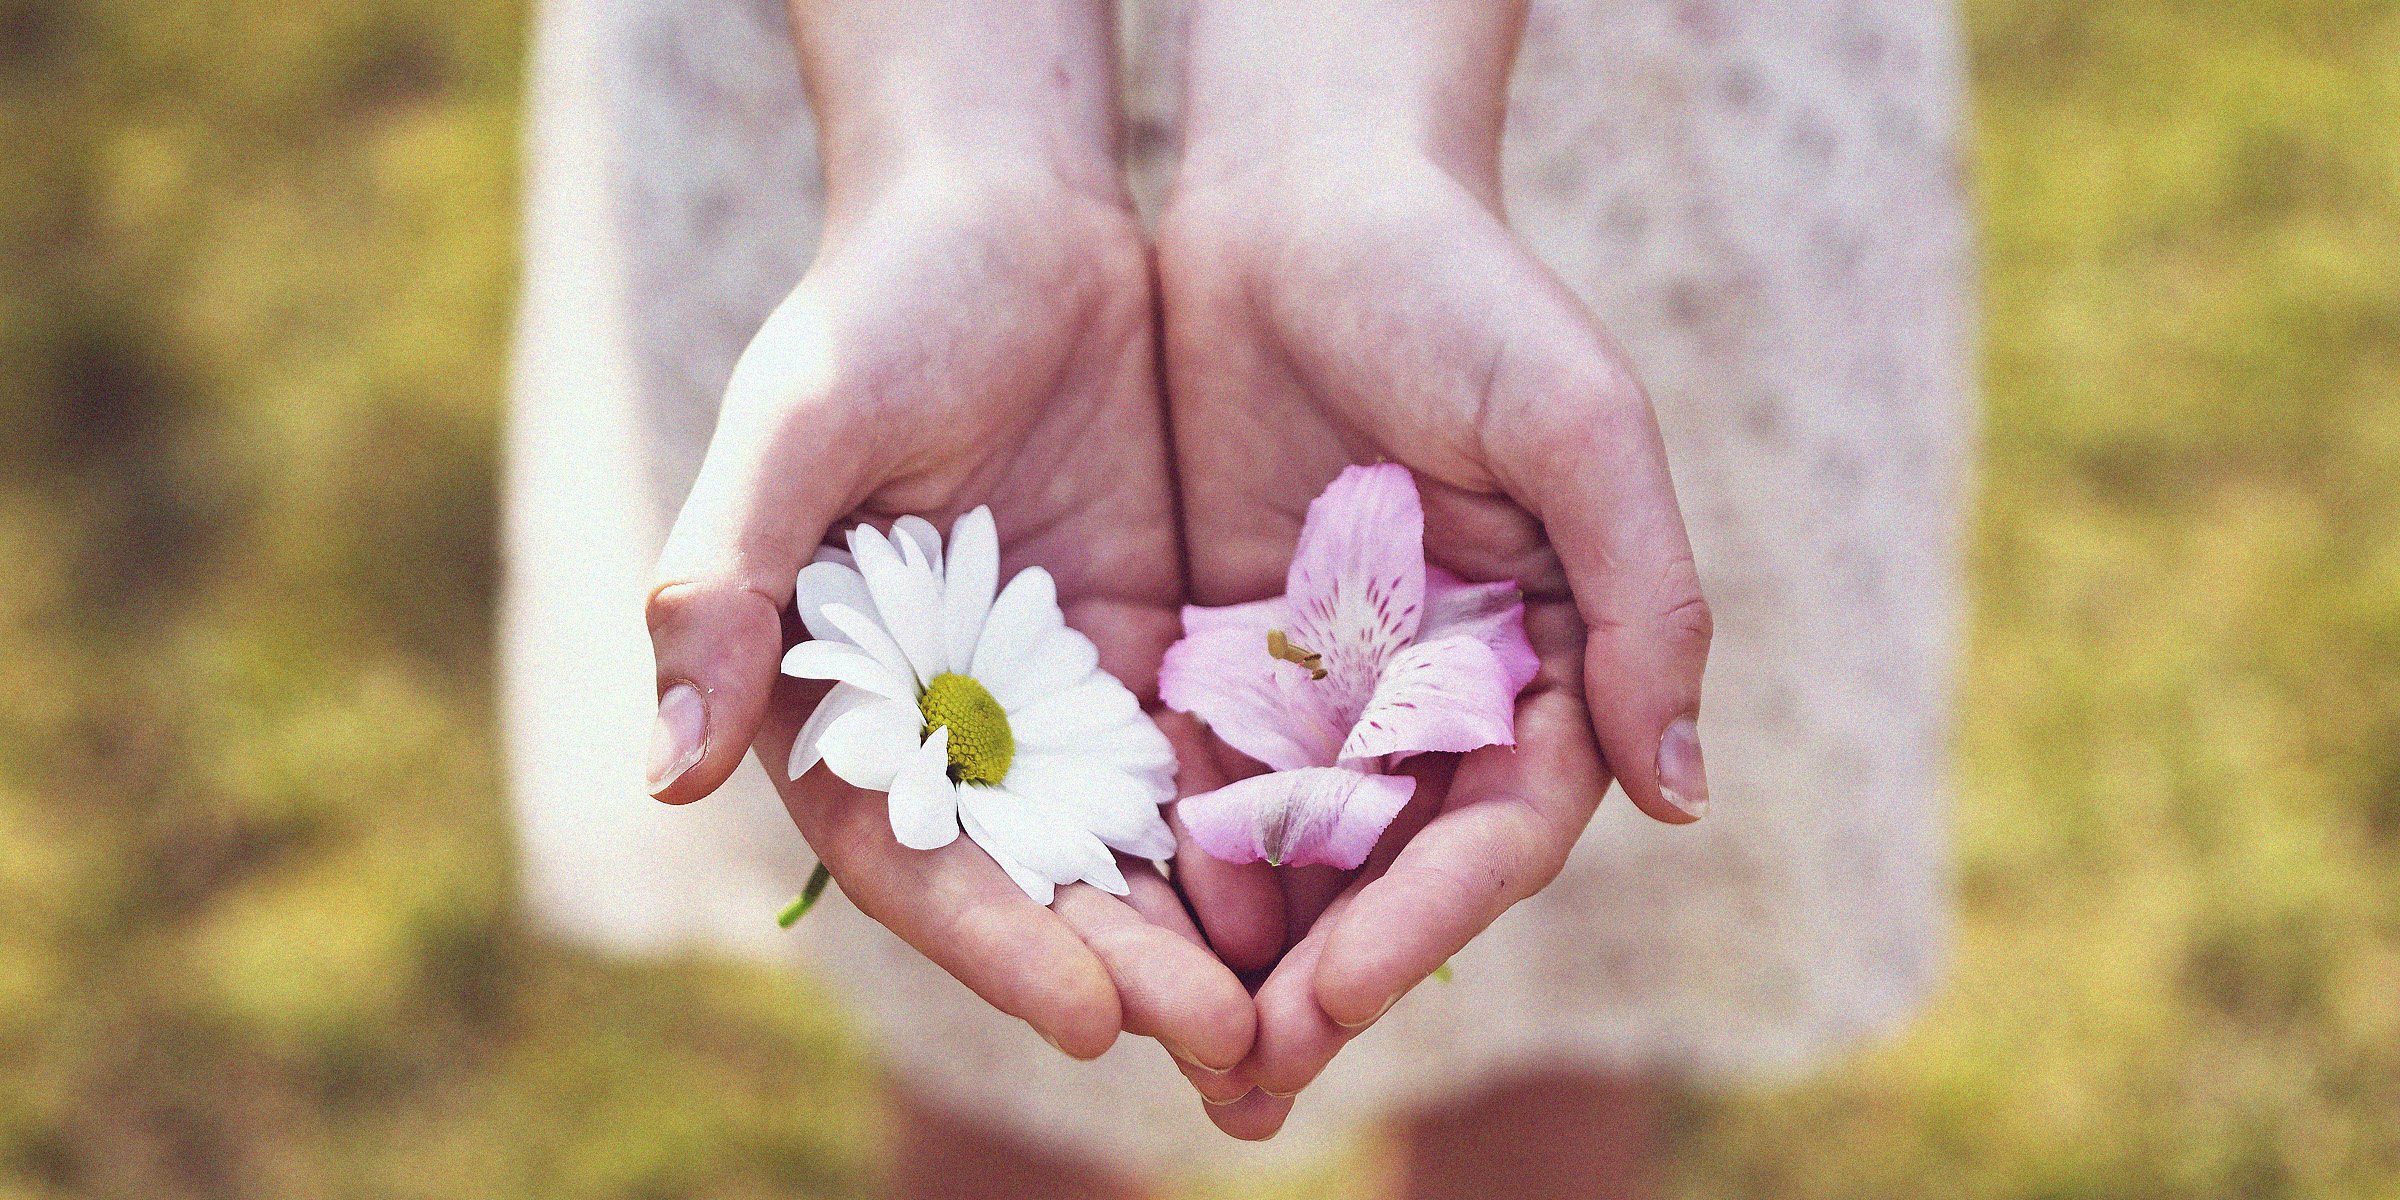 A woman holding flowers in her palms. | Source: Unsplash